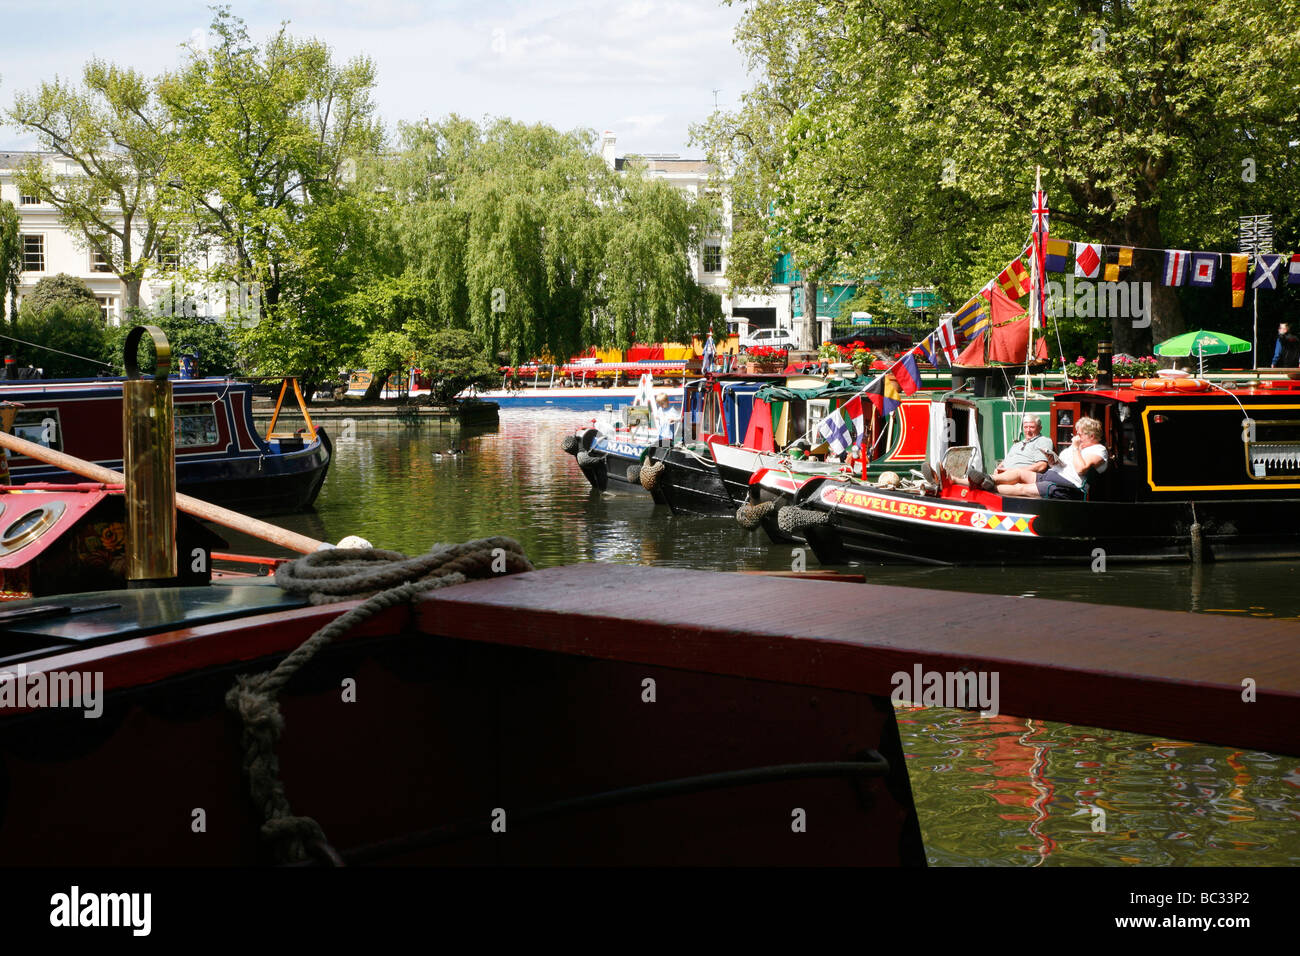 Canal boats moored in Little Venice during Canalway Cavalcade, Maida Vale, London, UK Stock Photo